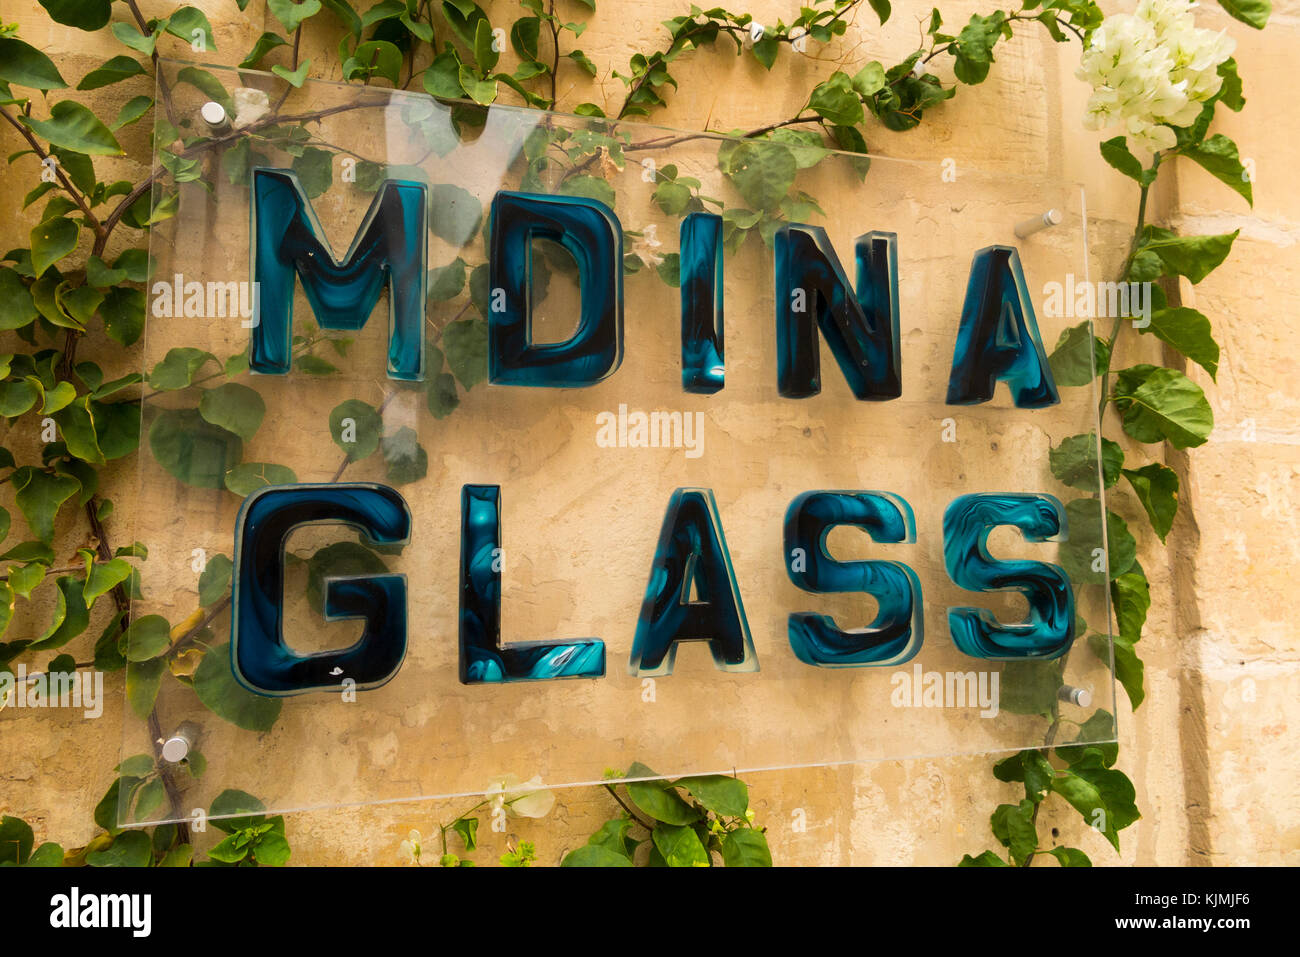 Mdina shop selling glass products / blown glass / vase / vases on sale / for sale in the walled town of Mdina in Malta. (91) Stock Photo